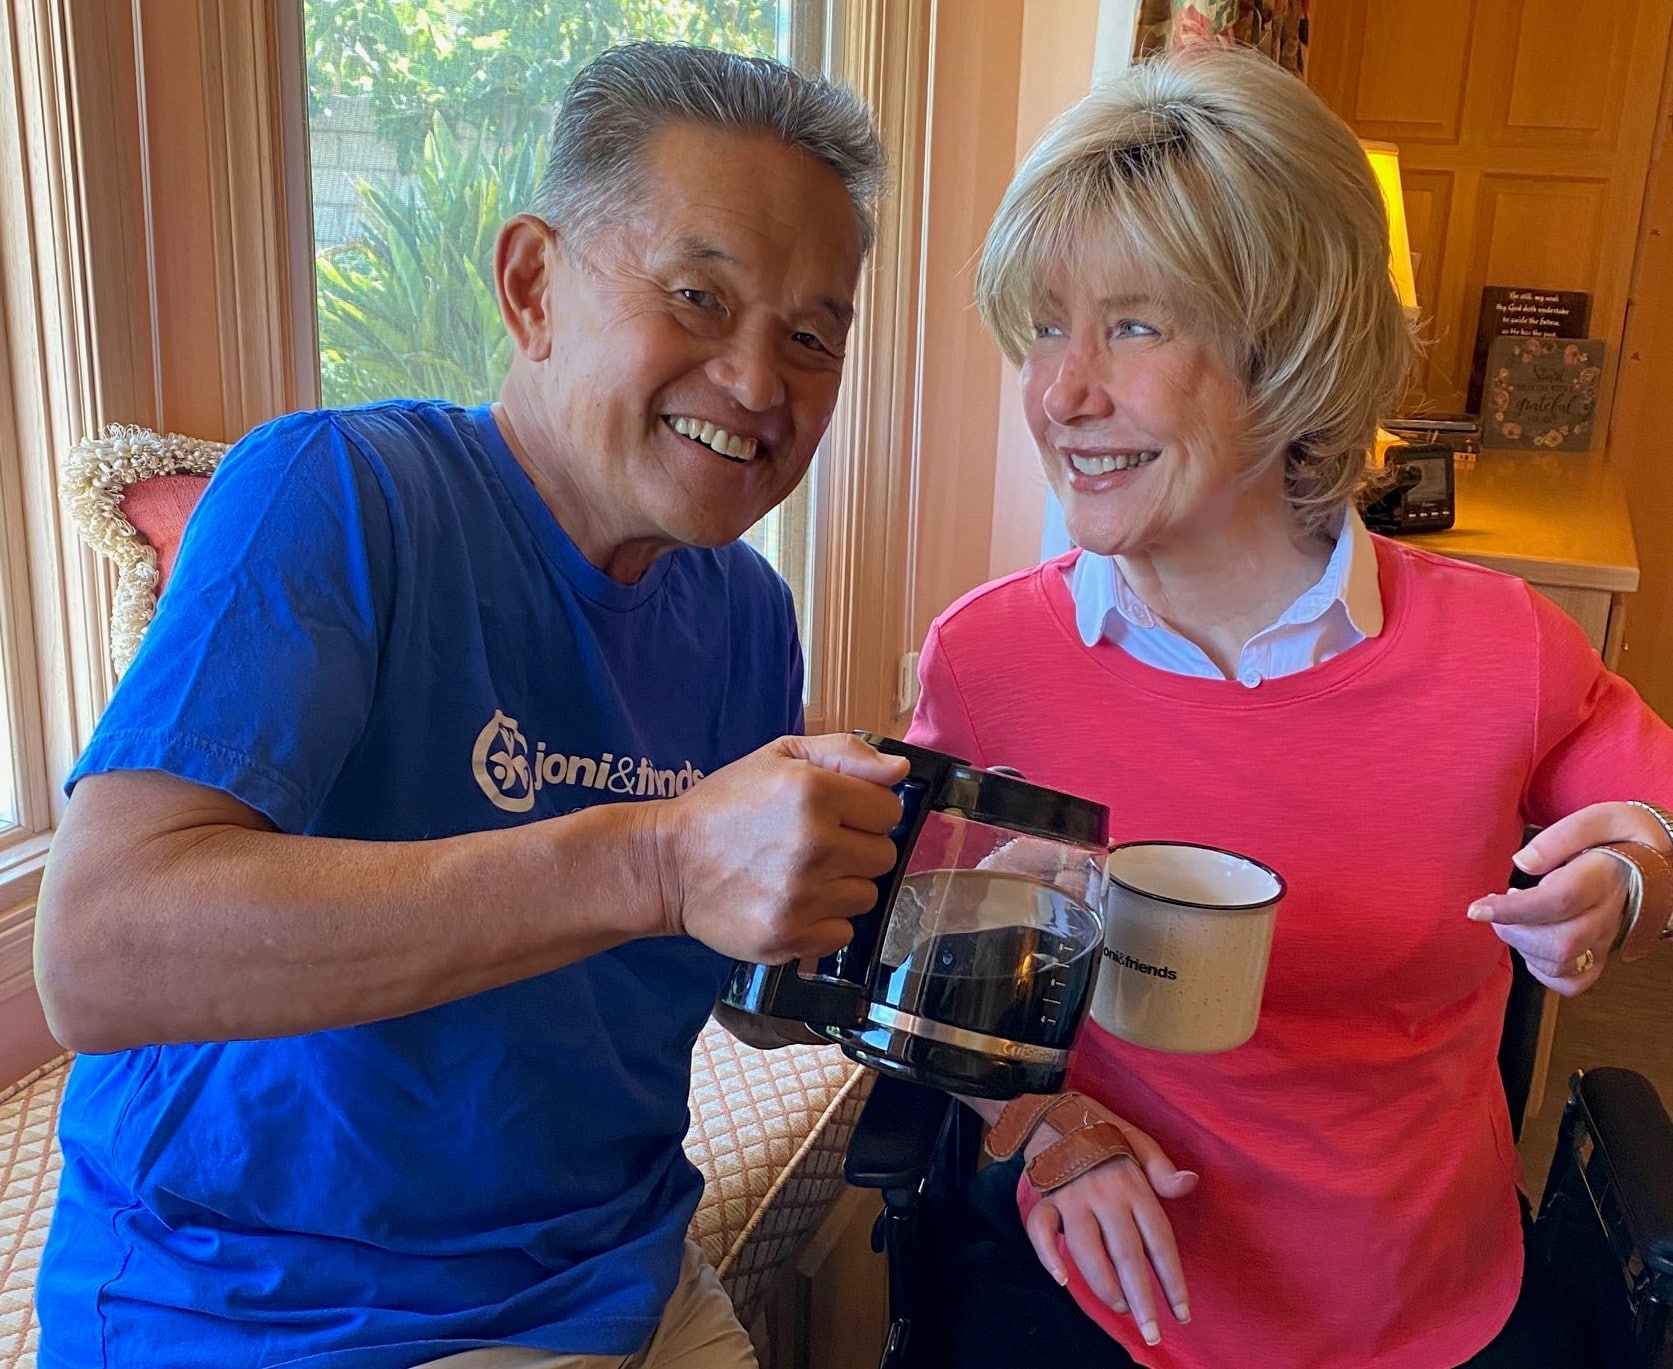 Close up of Joni smiling at Ken as he pours her a cup of coffee.